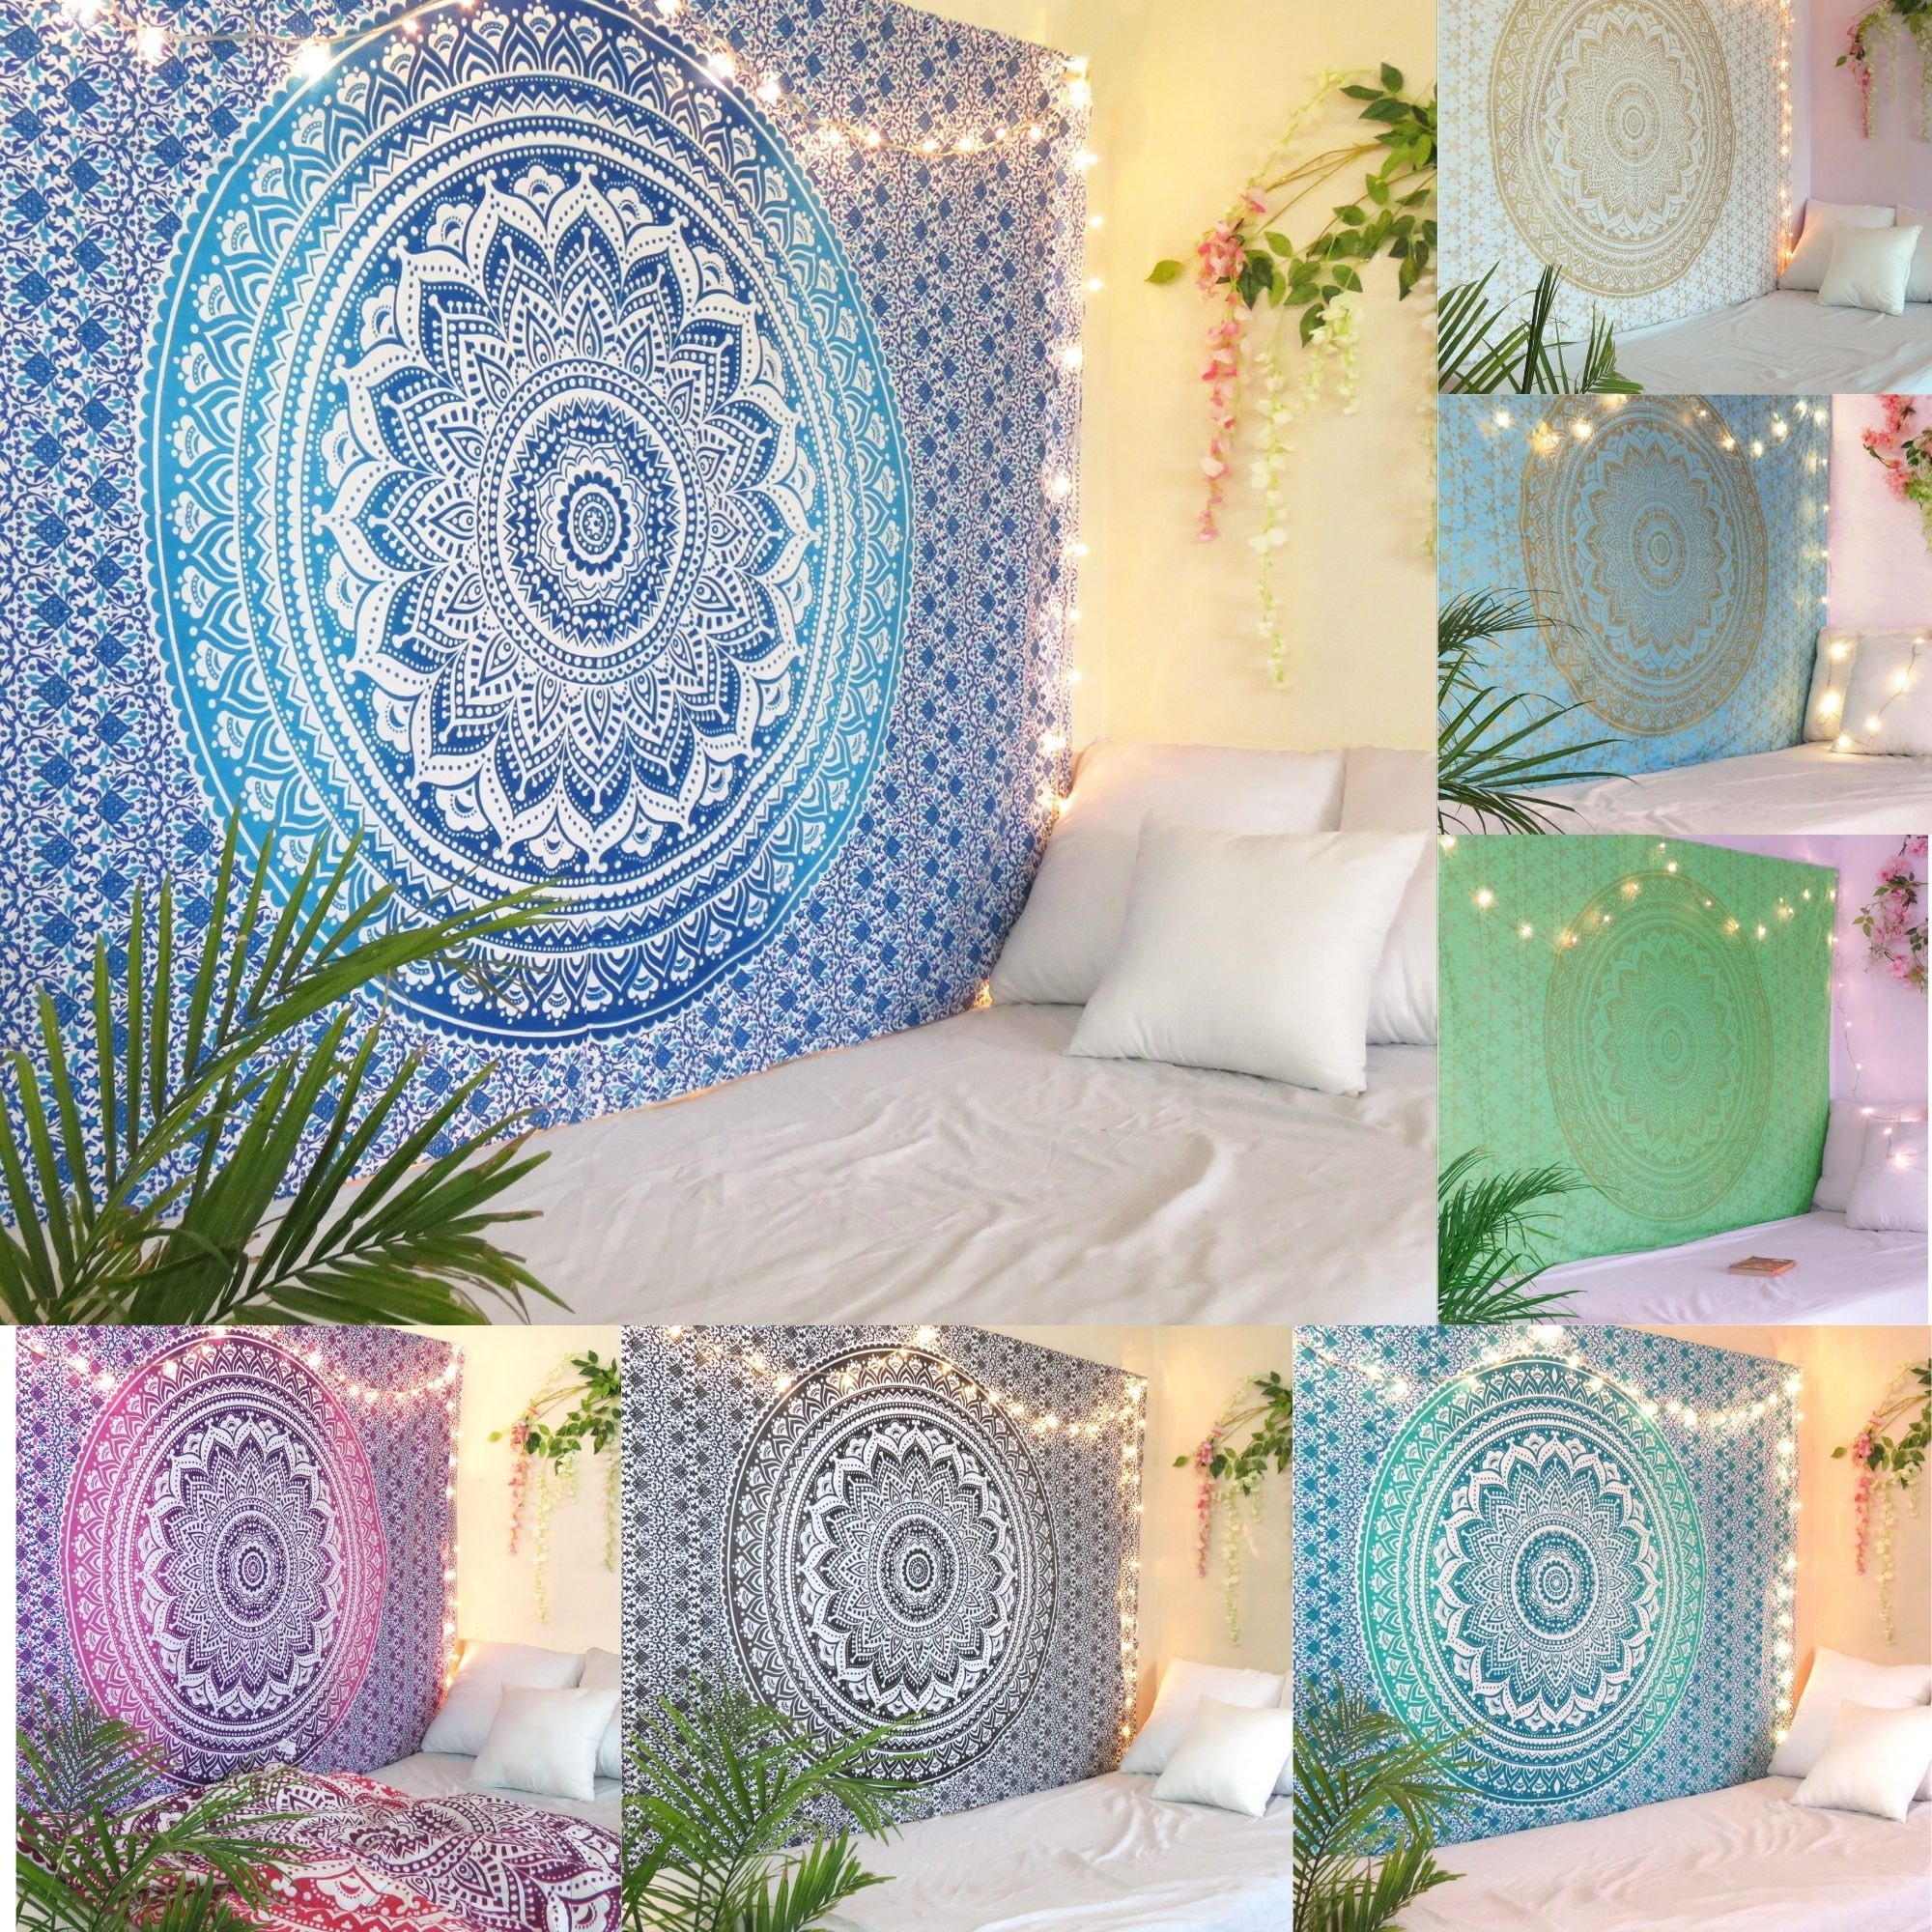 Indian New Cotton Tapestry Mandala Wall Hanging Home Decor Art Bedspread Bedding